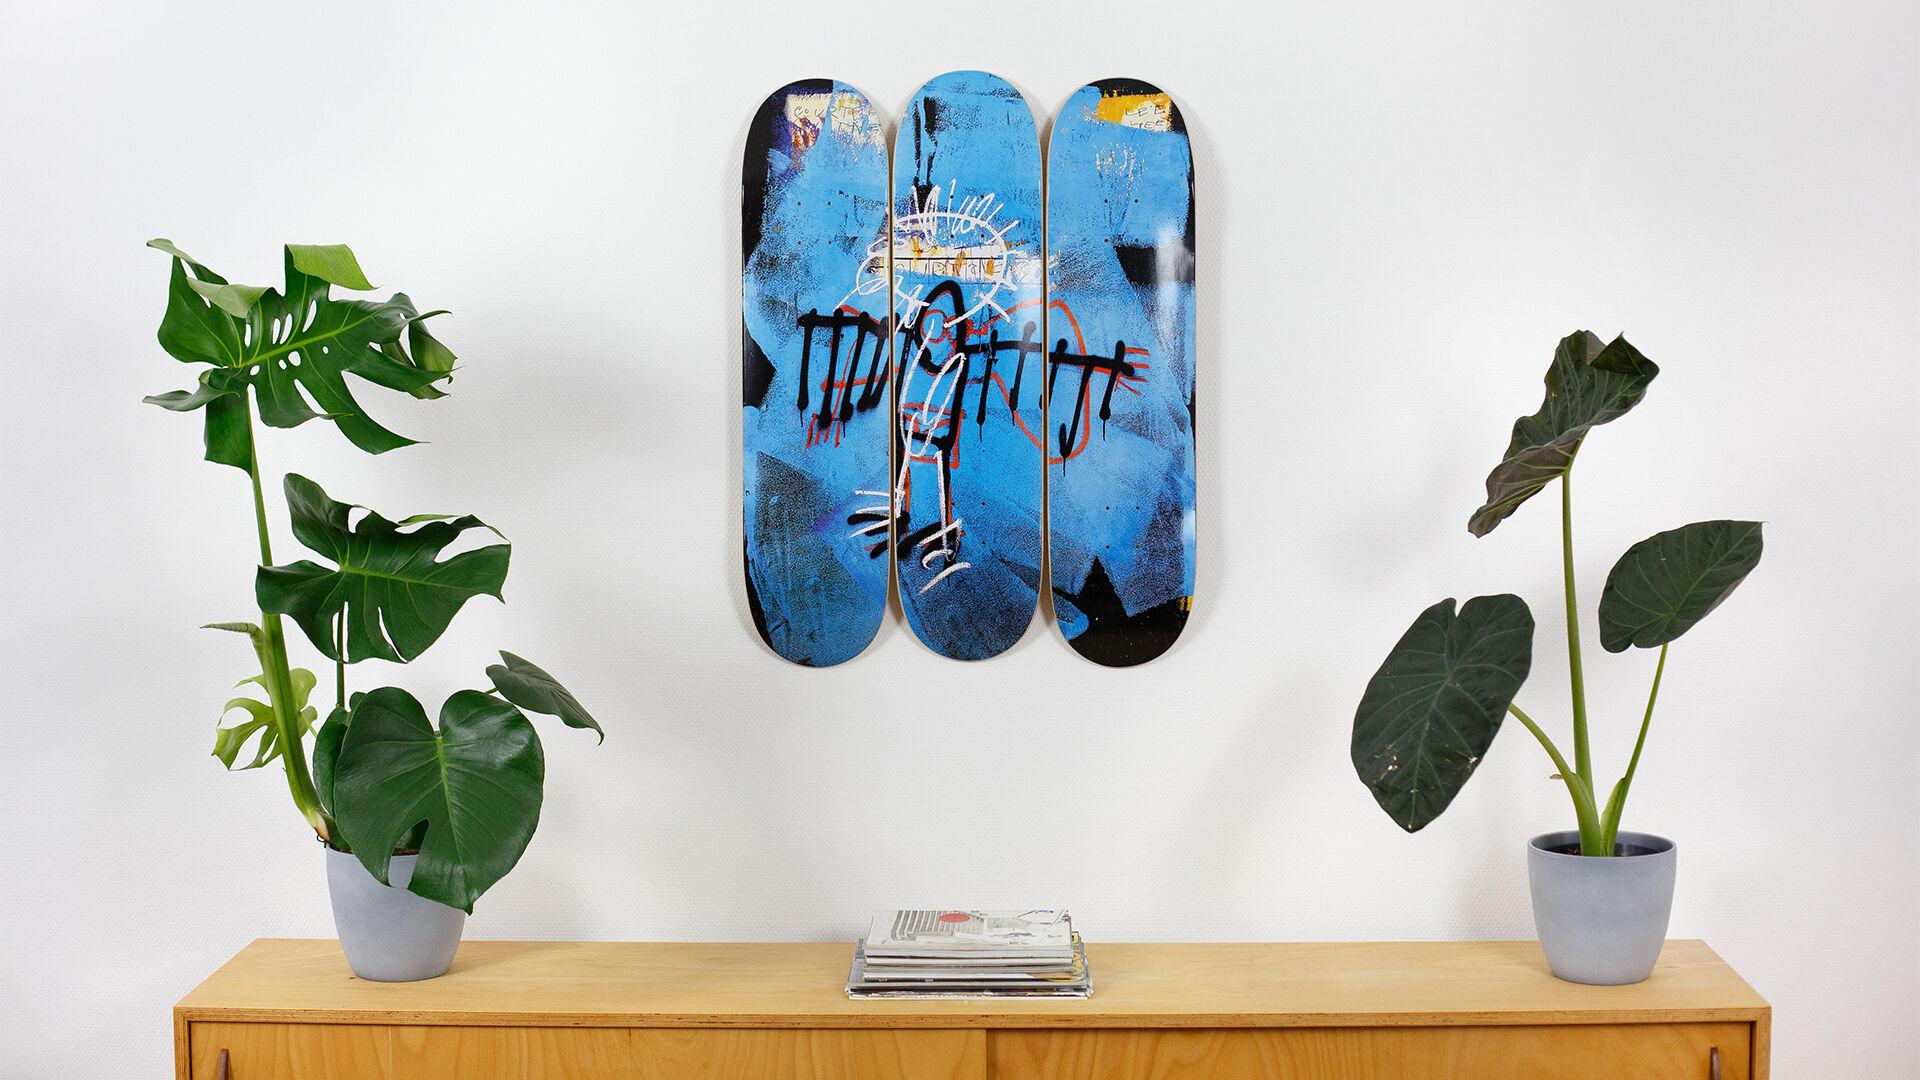 The Skateroom w/ Jean-Michel Basquiat Estate
based on Untitled (Angel), 1982
set of three skateboard decks
7-ply Canadian Maplewood with screen-print
each deck: 31 h. x 8 inches
installed dimensions: approx. 31 h. x 26 inches
mounting hardware